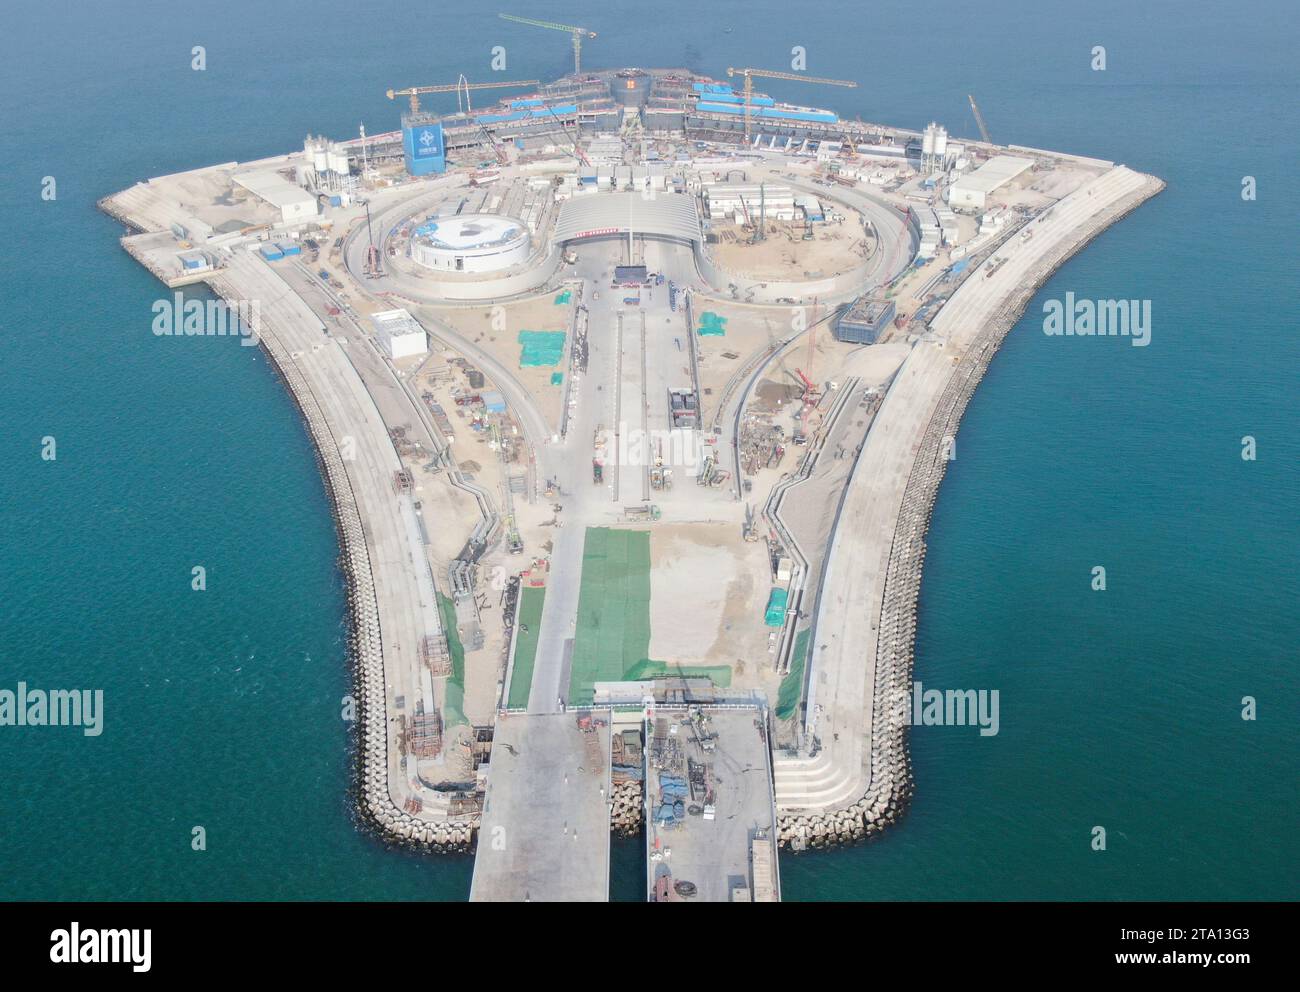 (231128) -- ZHONGSHAN, Nov. 28, 2023 (Xinhua) -- This aerial photo taken on Nov. 27, 2023 shows the west artificial island of the Shenzhen-Zhongshan link in south China's Guangdong Province. A cross-sea highway project between the cities of Shenzhen and Zhongshan in south China's Guangdong Province is one step closer to completion.   The last pouring of concrete was put in place on Tuesday, as work on the immersed tube underwater tunnel, which spans around 6.8 km, is nearing its end, said Guangdong Provincial Communication Group Co., Ltd.    The tunnel is part of a 24-km-long highway connectin Stock Photo